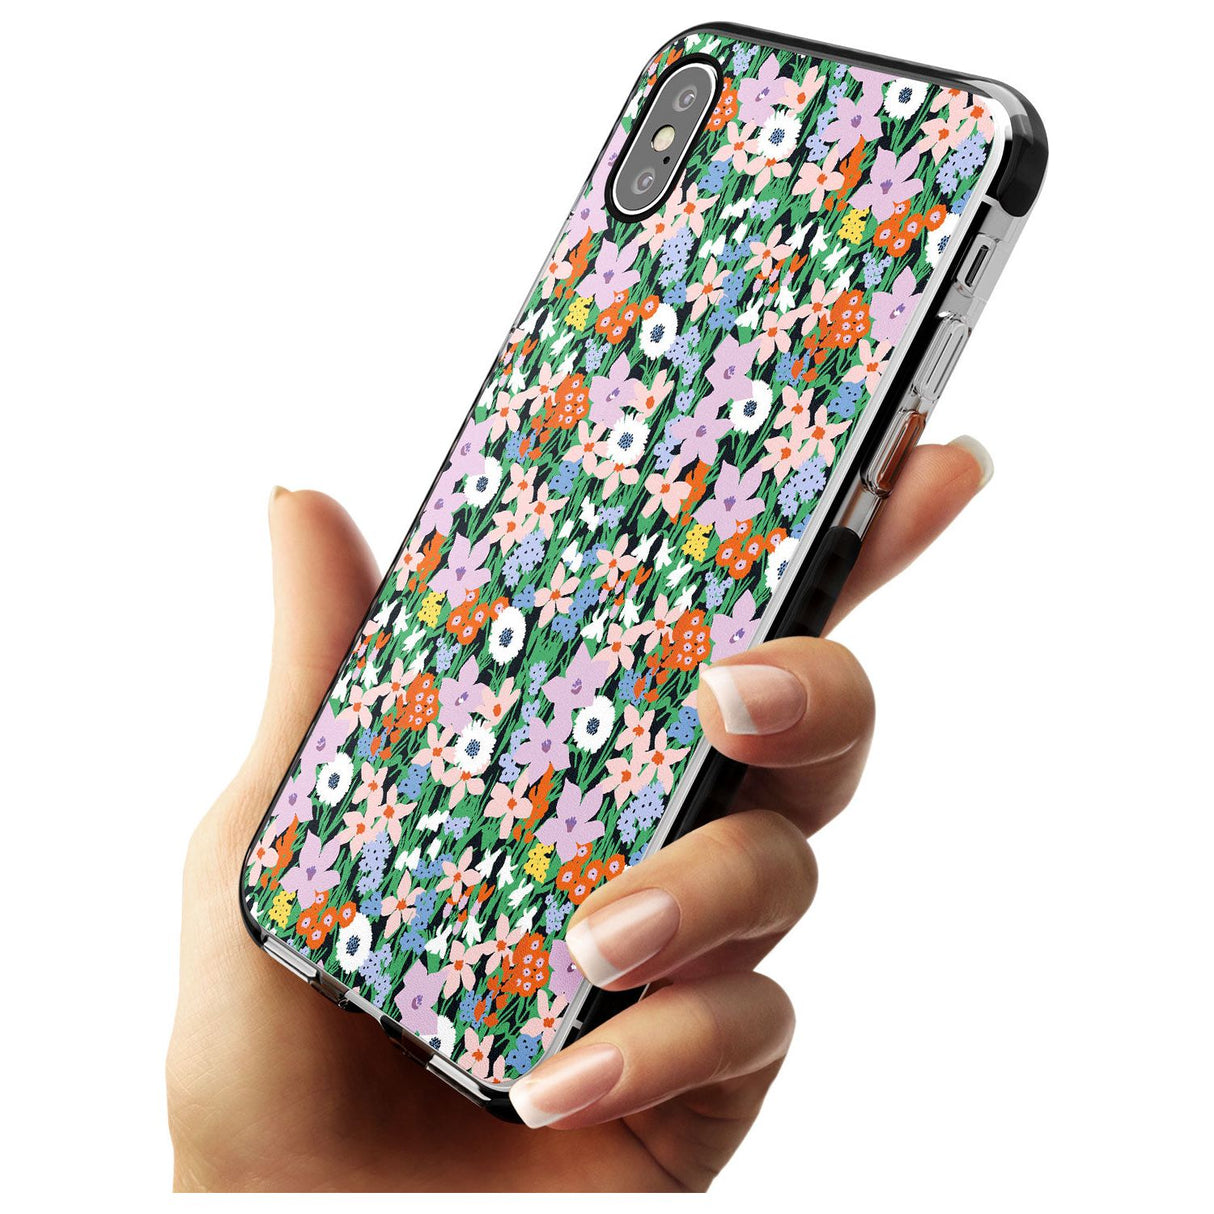 Jazzy Floral Mix: Solid Pink Fade Impact Phone Case for iPhone X XS Max XR